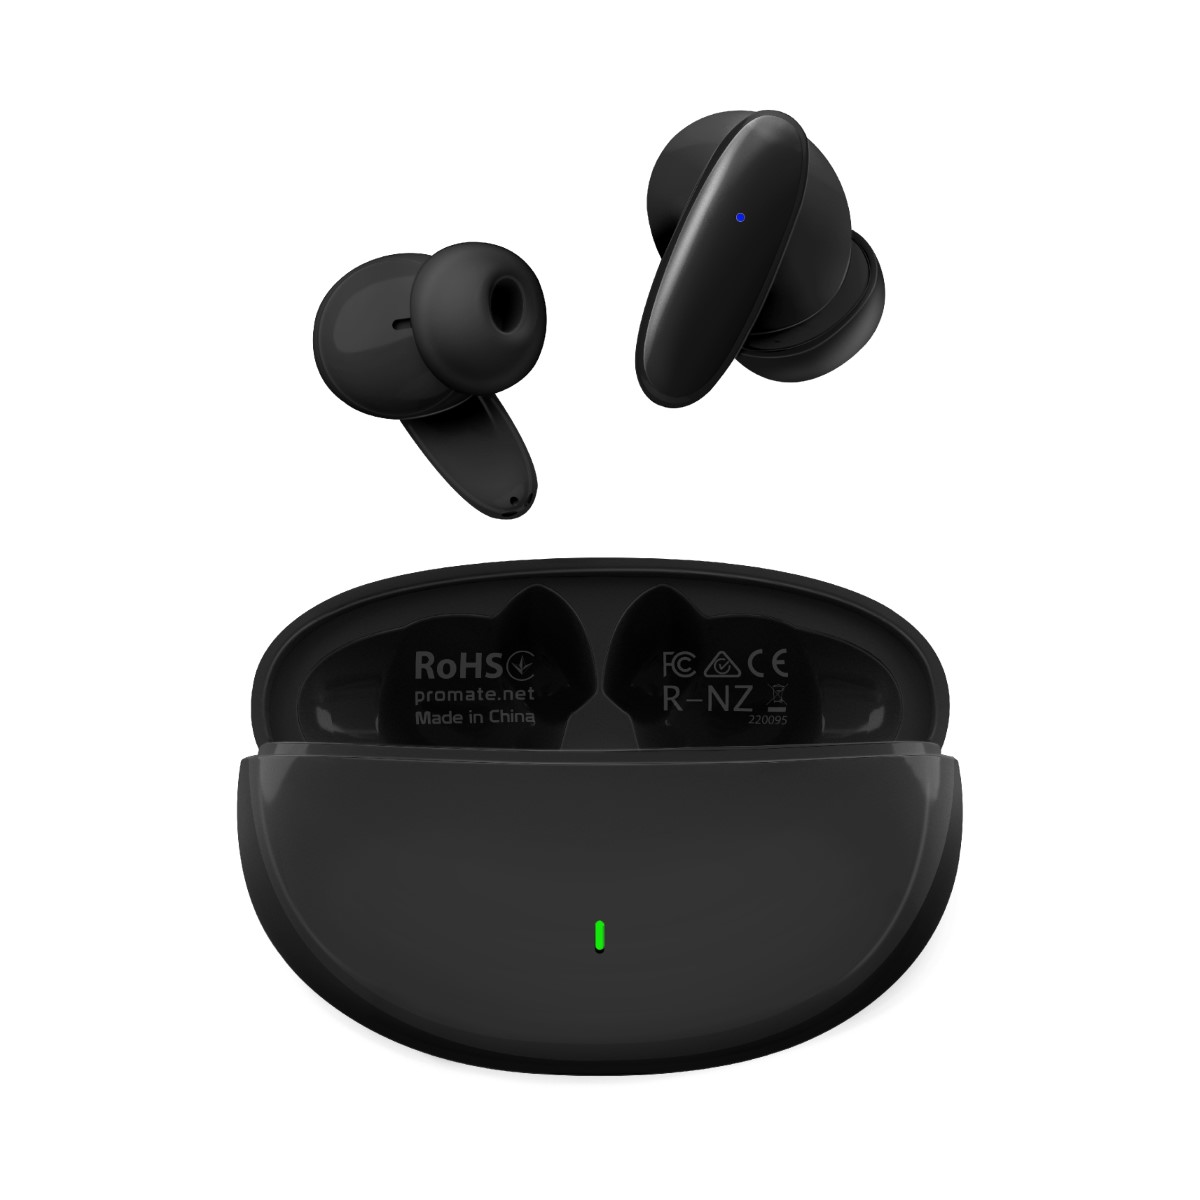 Promate True Wireless Earbuds with Bluetooth v5.1, Mic, IPX5 Water Resistance and Auto Pairing, Lush Black